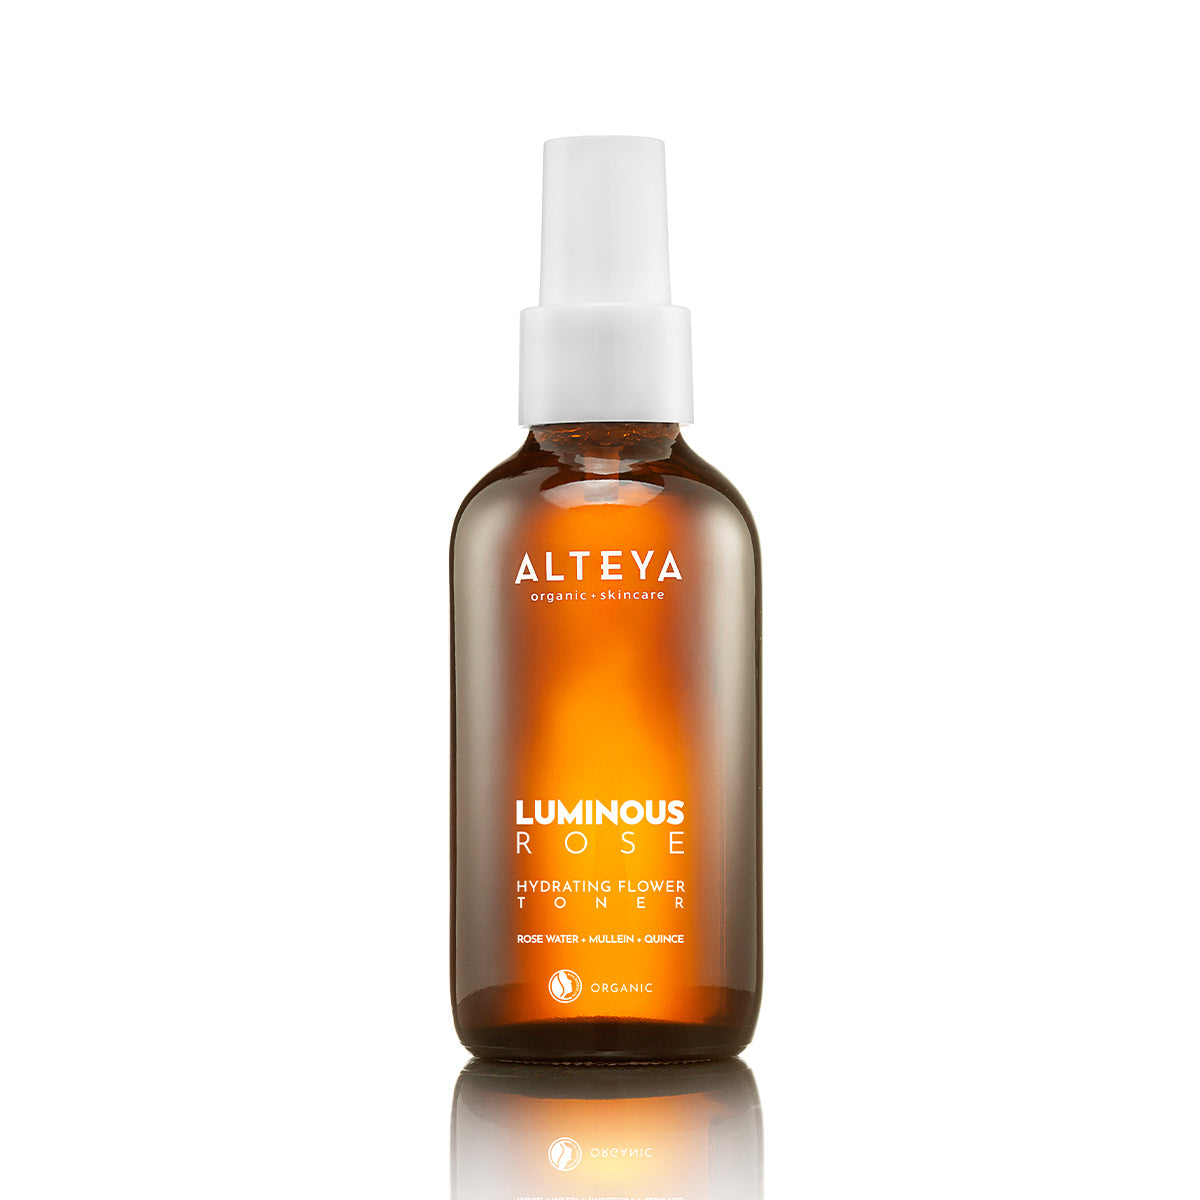  Hydrating toner helps purify skin from residual impurities, makeup, and pollution, making skin soft and luminous. 